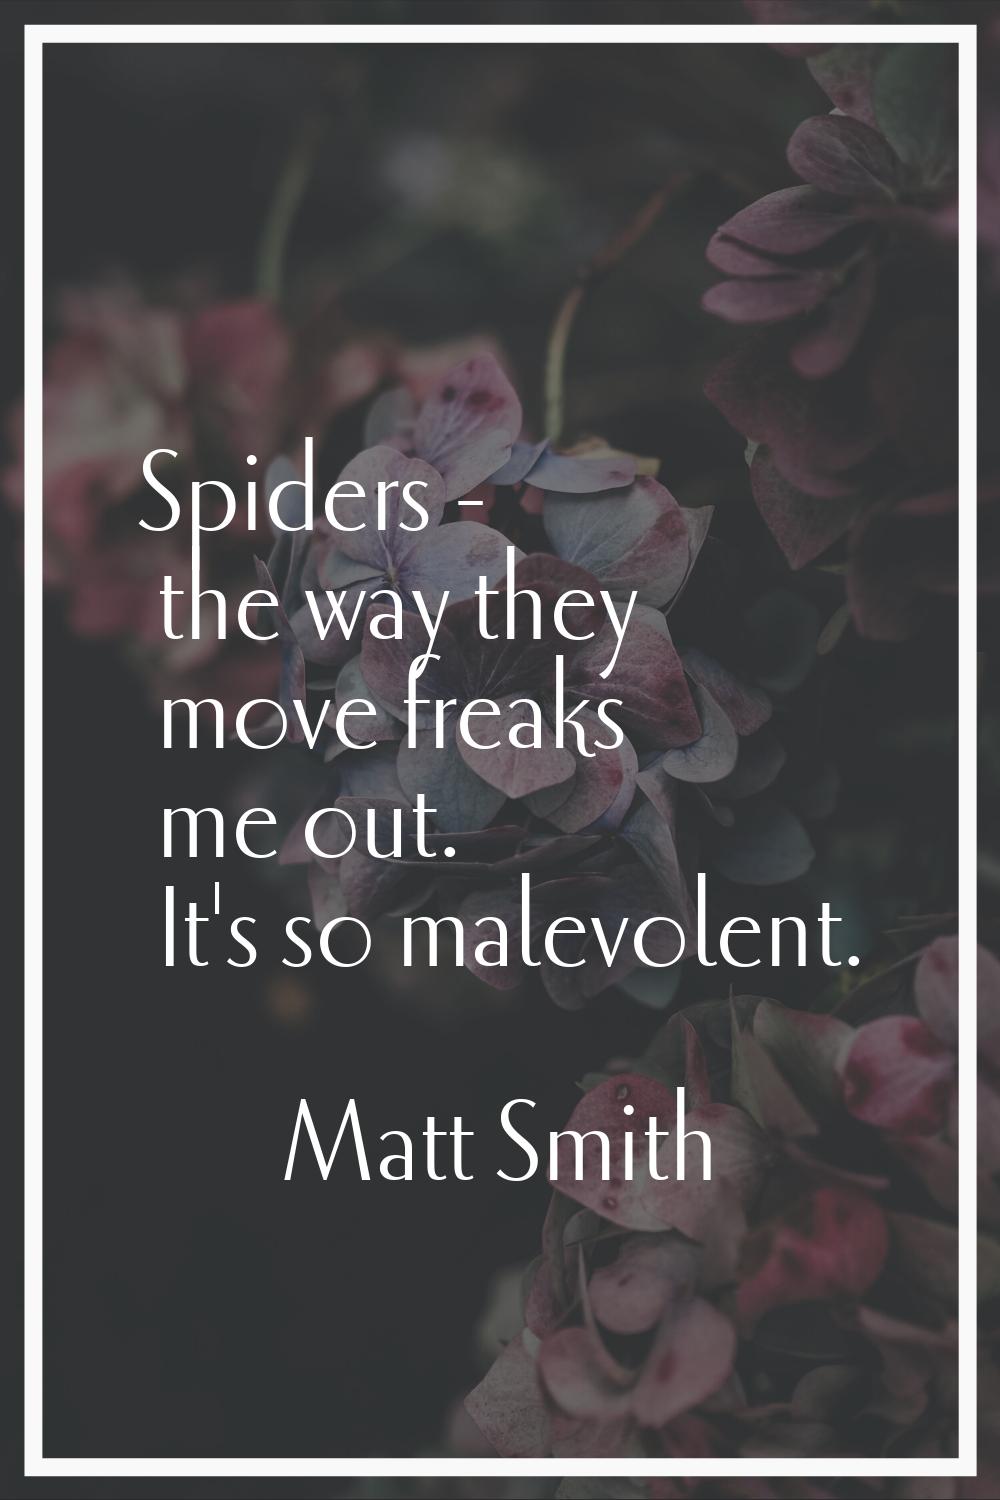 Spiders - the way they move freaks me out. It's so malevolent.